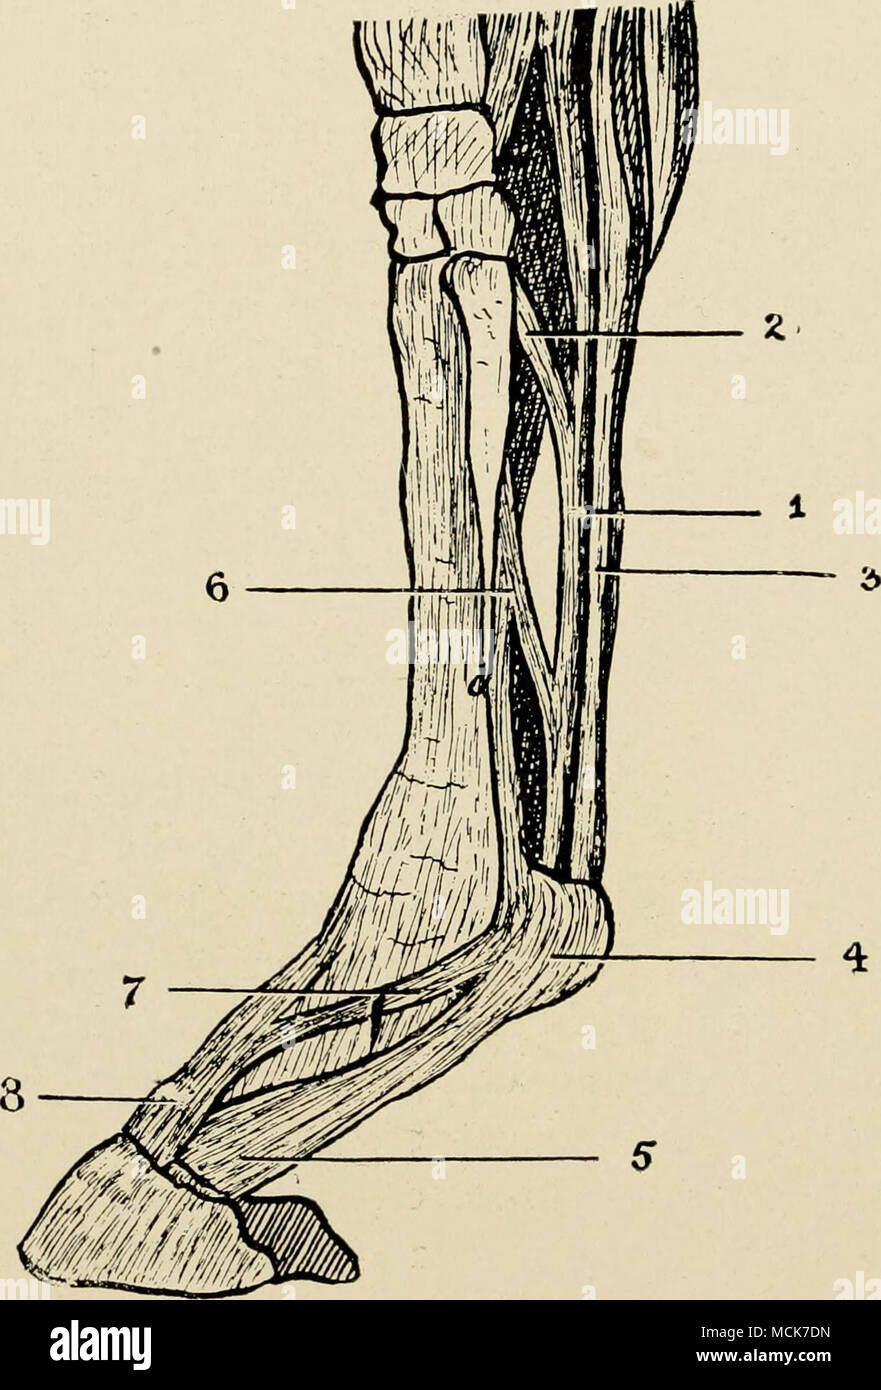 . Fig. 10.—The Flexor Tendons and Extensor Pedis. (After Haubner.) I, Tendon of flexor perforans; 2, its supporting check-band from the posterior ligament of the carpus; 3, tendon of the flexor per- forates ; 4, ring and sheath of the flexor perforatus; 5, widen- ing  out the the flexor perf oratus to form the plantar aponeu- rosis; 6, suspensory ligament; 7, reinforcing band from the suspensory ligament to the extensor pedis; 8, the extensor pedis. The Flexor Pedis Perforatus, or the Superficial Flexor of the Phalanges.—In common with the perfo- rans, this muscle arises from the inner condylo Stock Photo